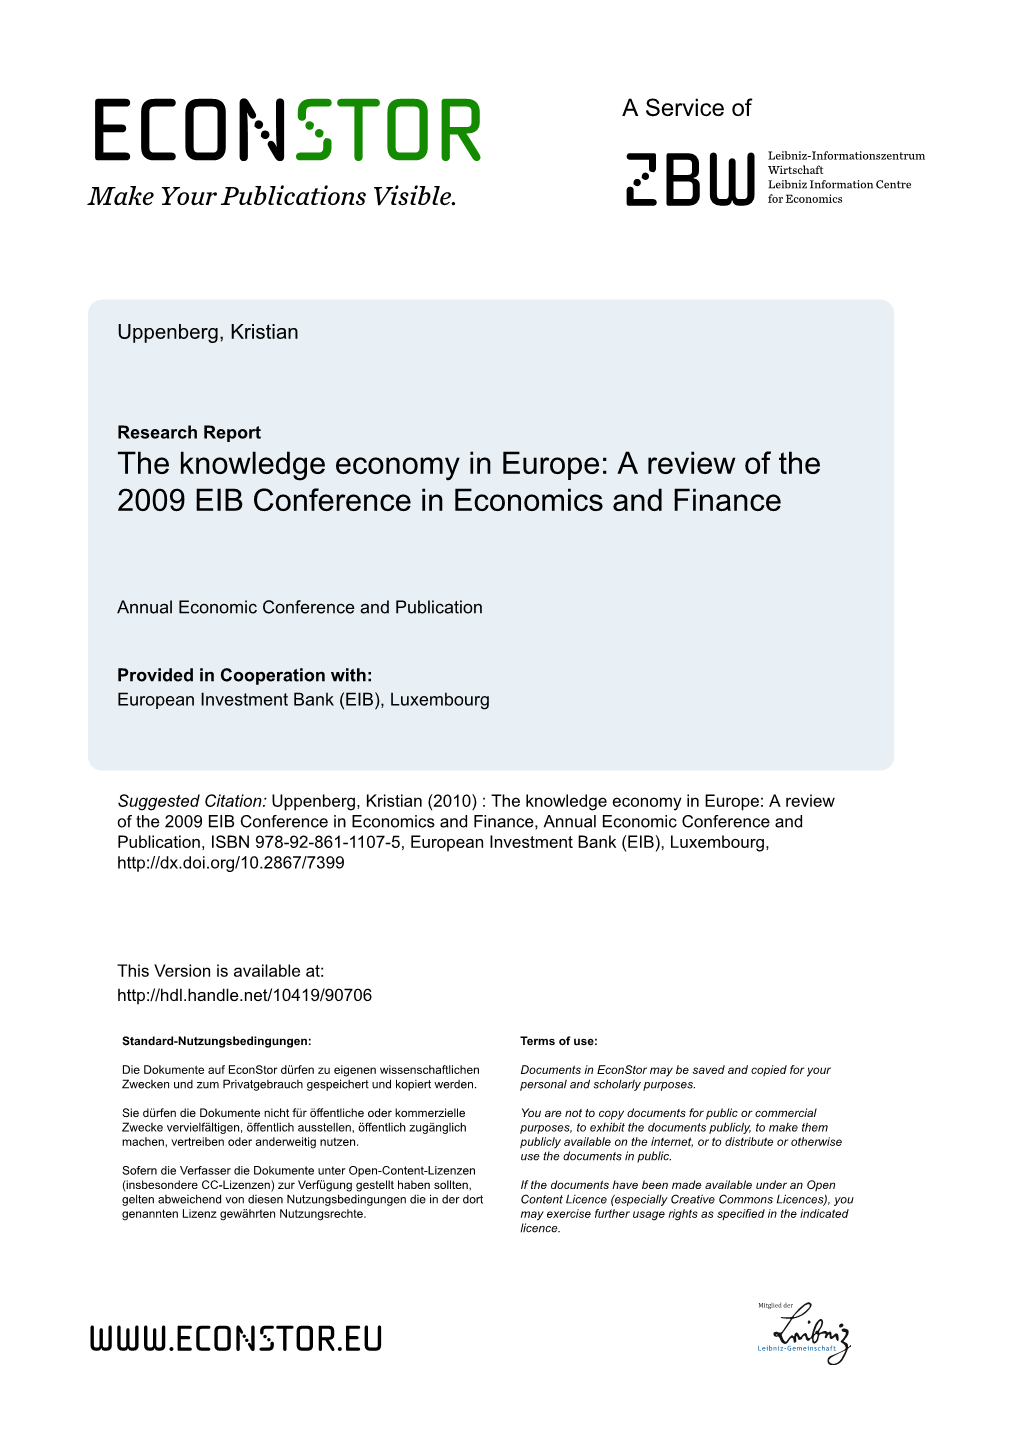 The Knowledge Economy in Europe: a Review of the 2009 EIB Conference in Economics and Finance